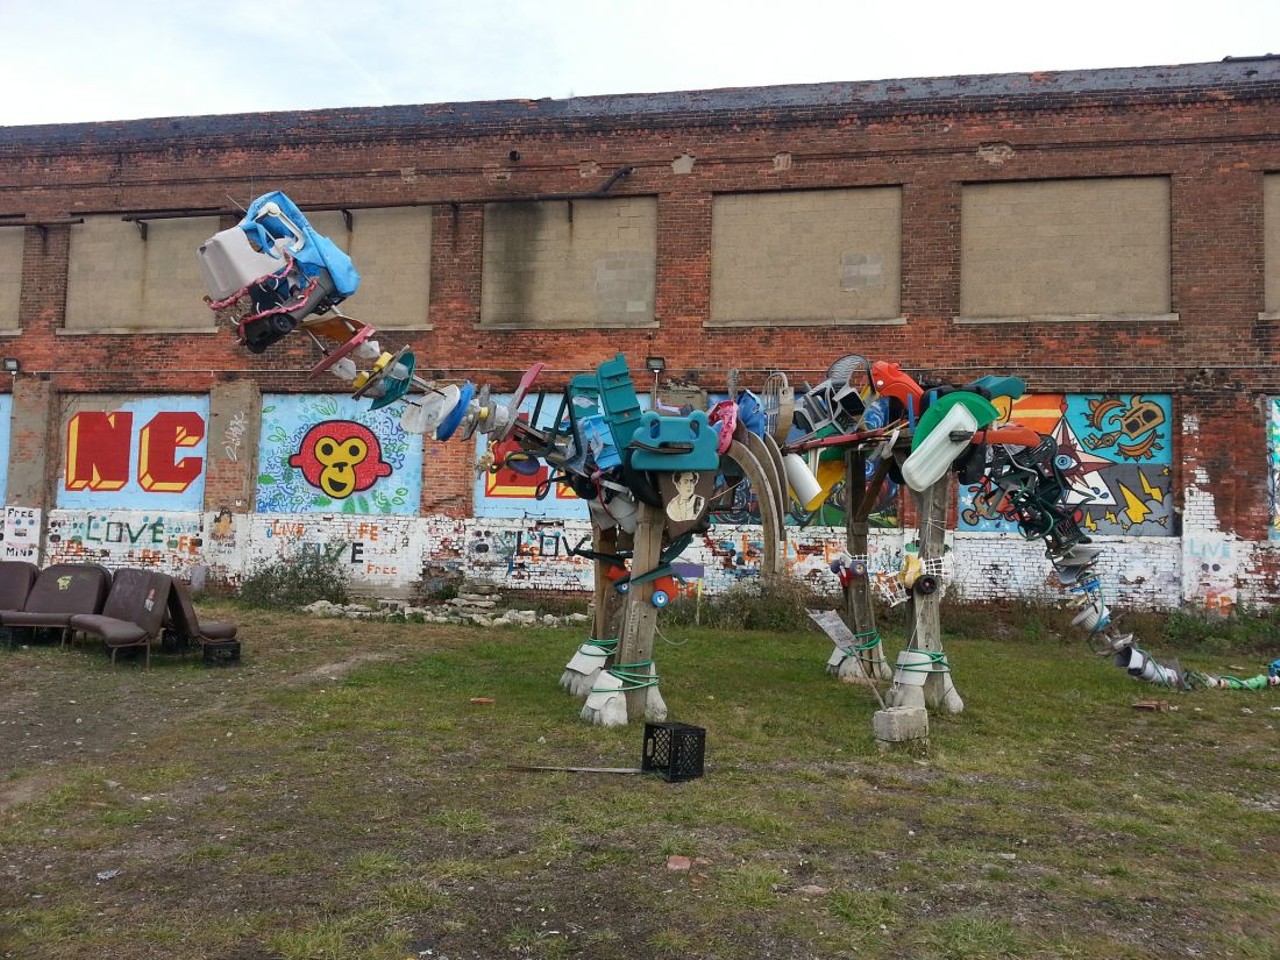 Lincoln Street Art Park
(5926 Lincoln St., Detroit)
Established in 2011, the Lincoln Street Art Park is a community arts project tucked behind a recycling center on Holden Avenue. Items dropped off for recycling can find a new life as a piece of artwork in the park.(Photo by Stephen, Flickr Creative Commons)